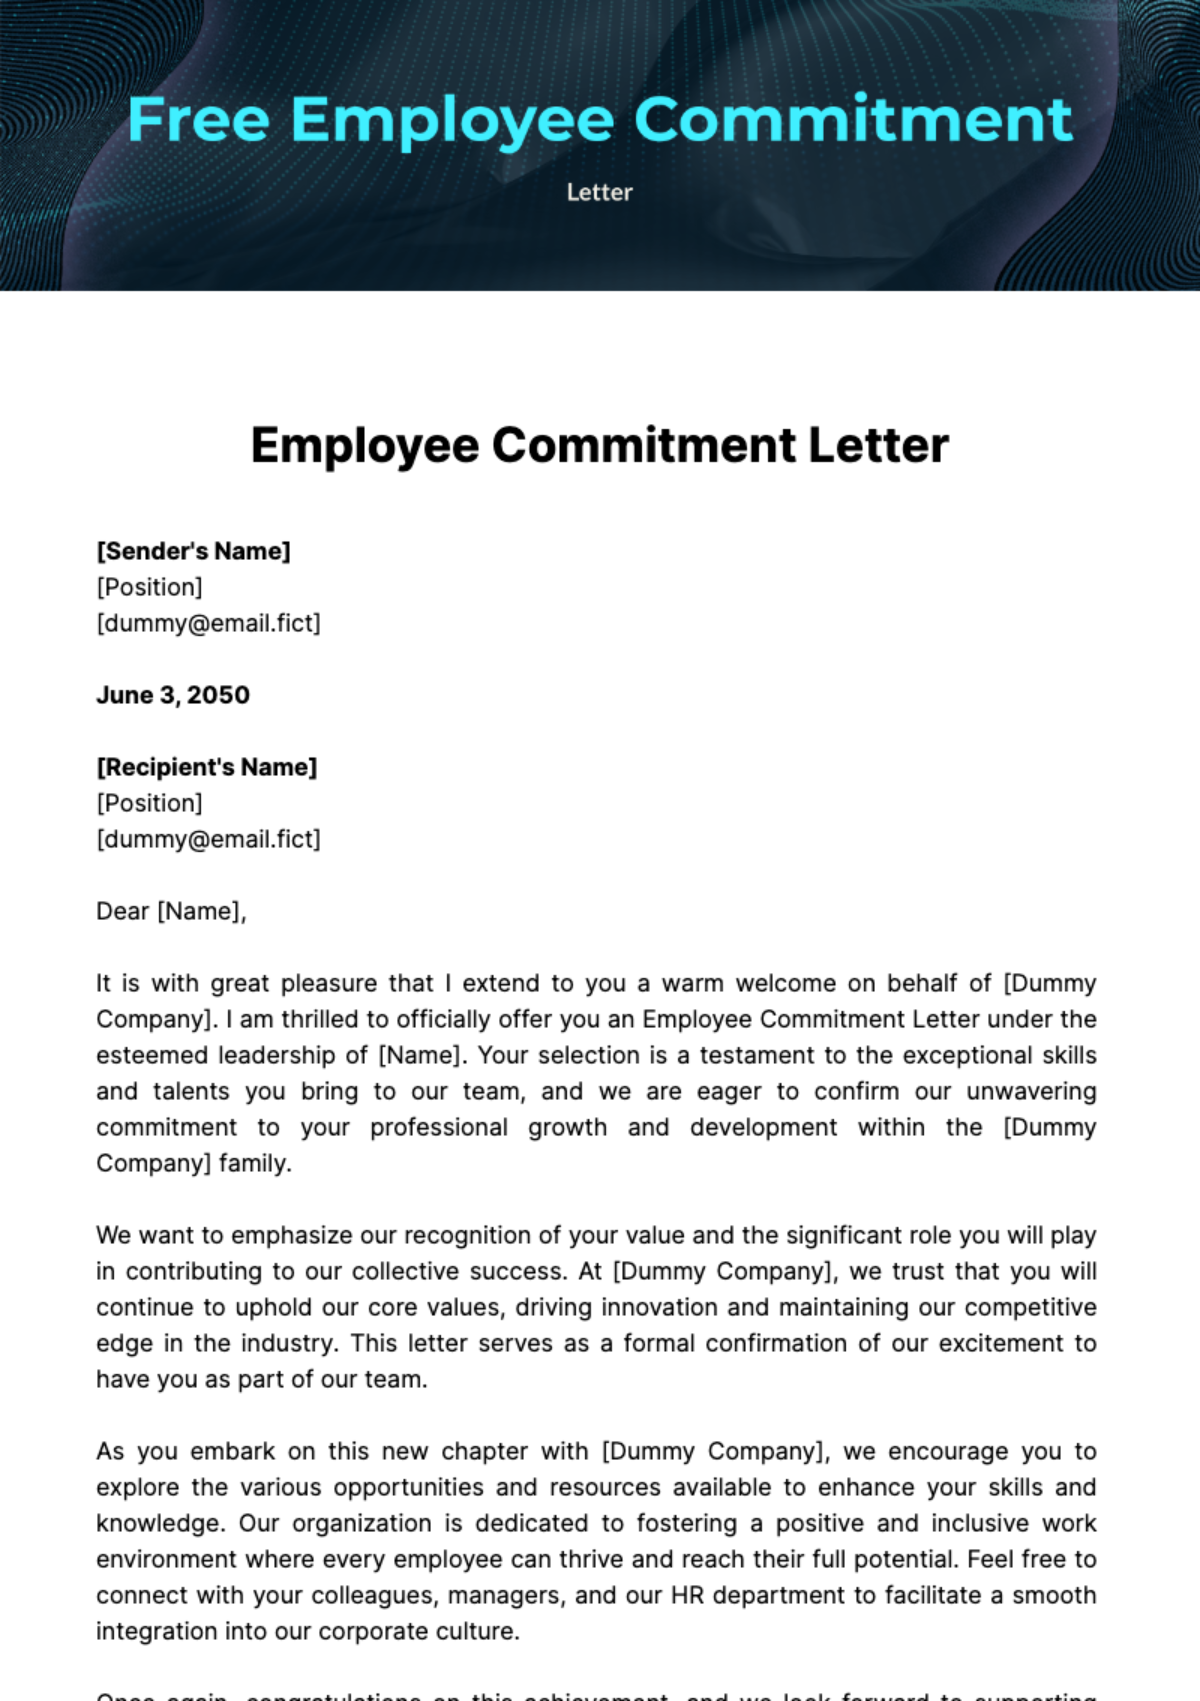 Free Employee Commitment Letter Template